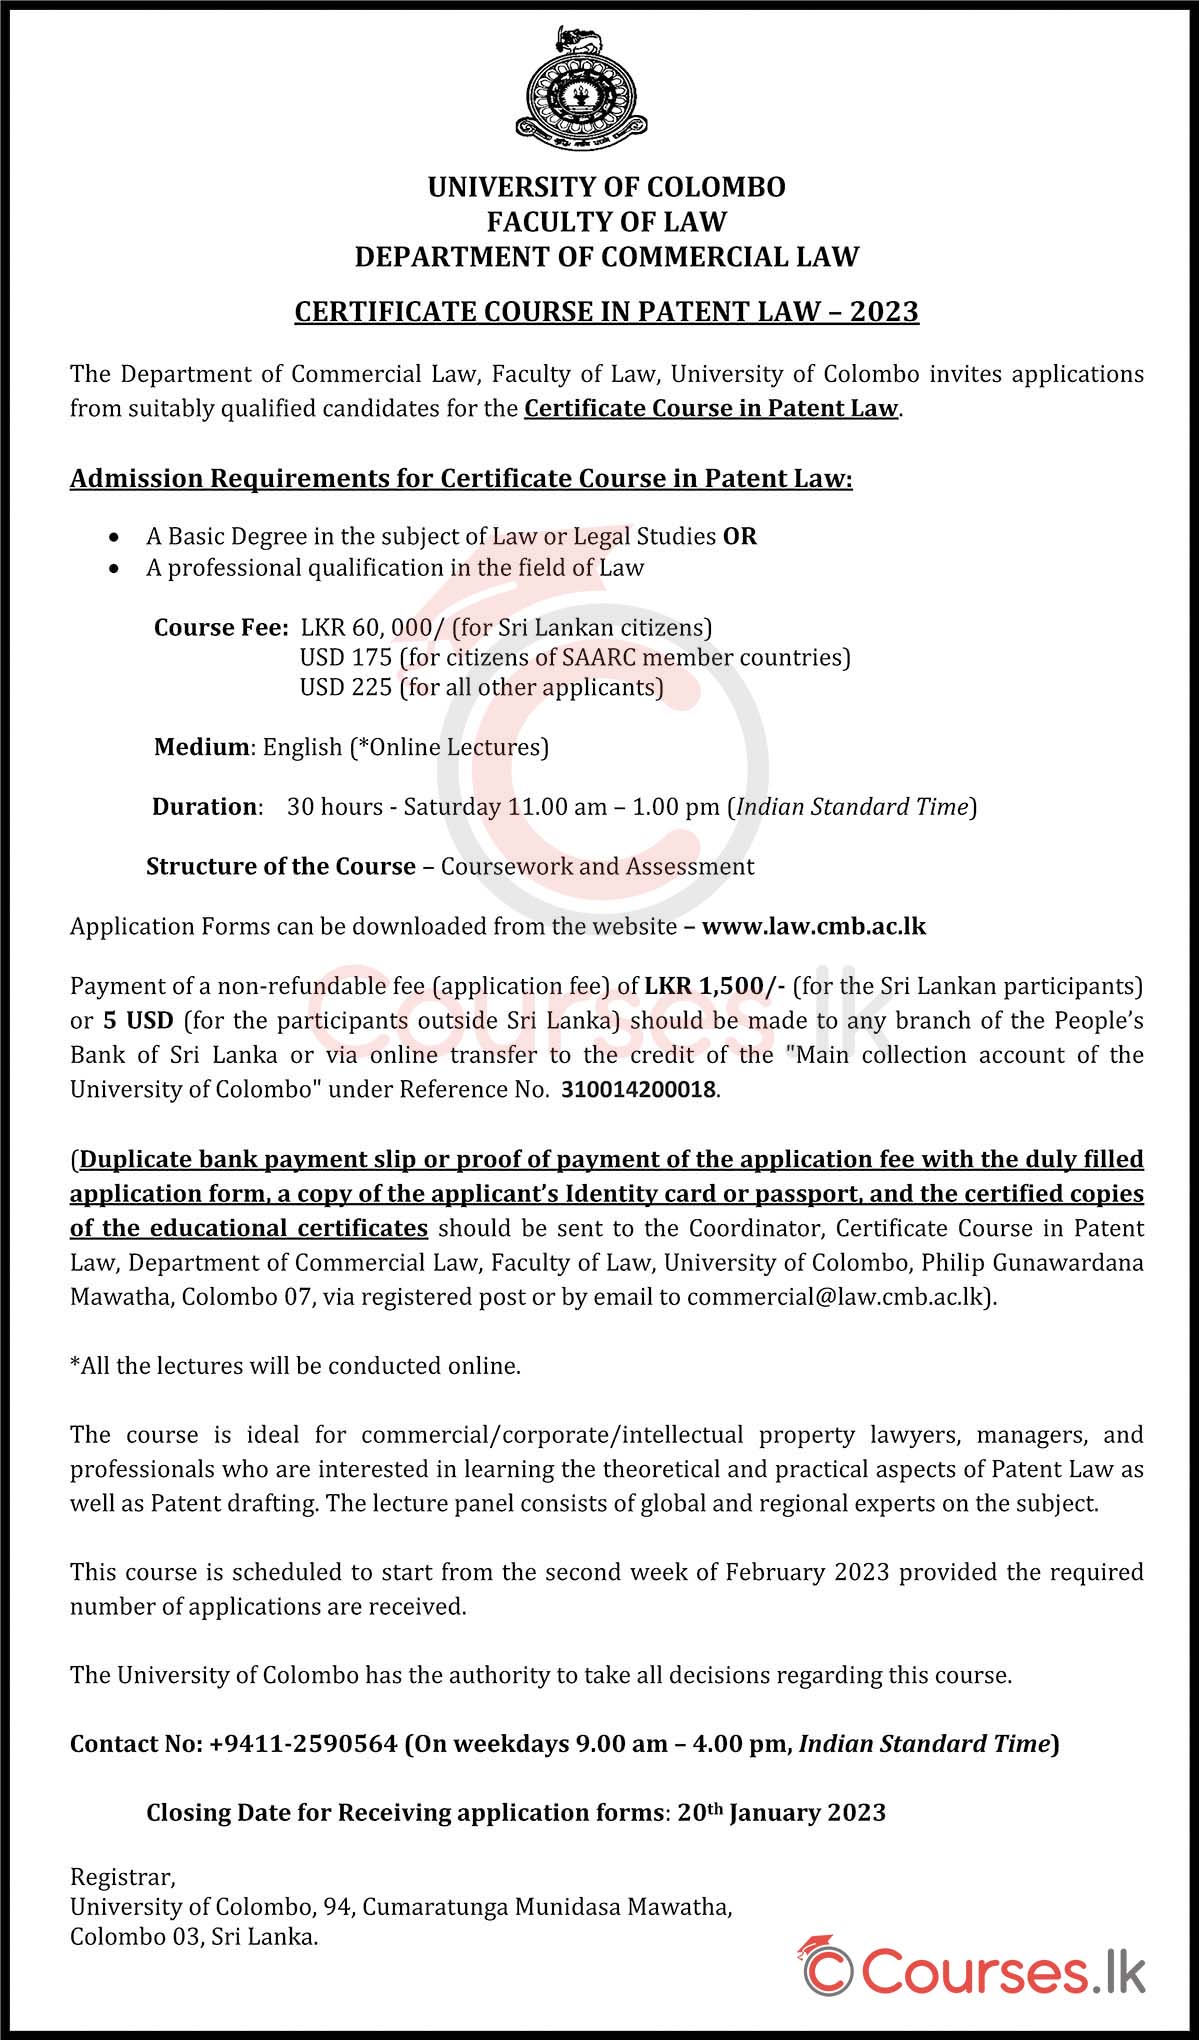 Certificate Course in Patent Law (2023) - University of Colombo